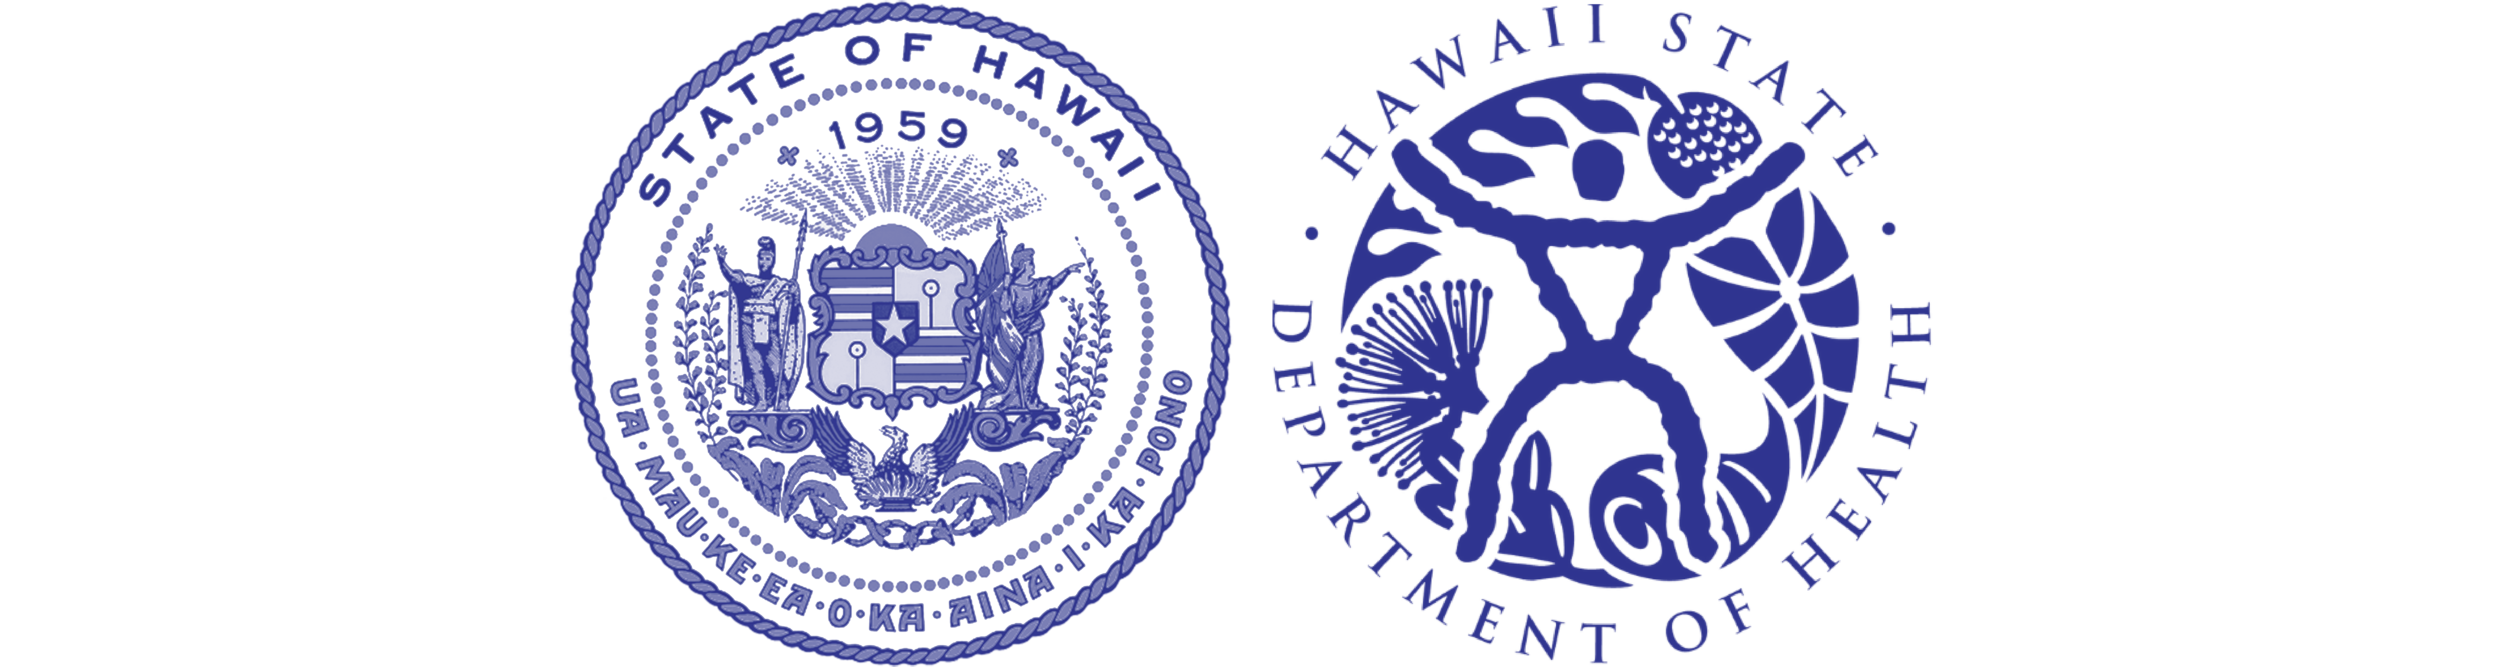 HPHA-resources-logo-State-Hawaii-DOH .png